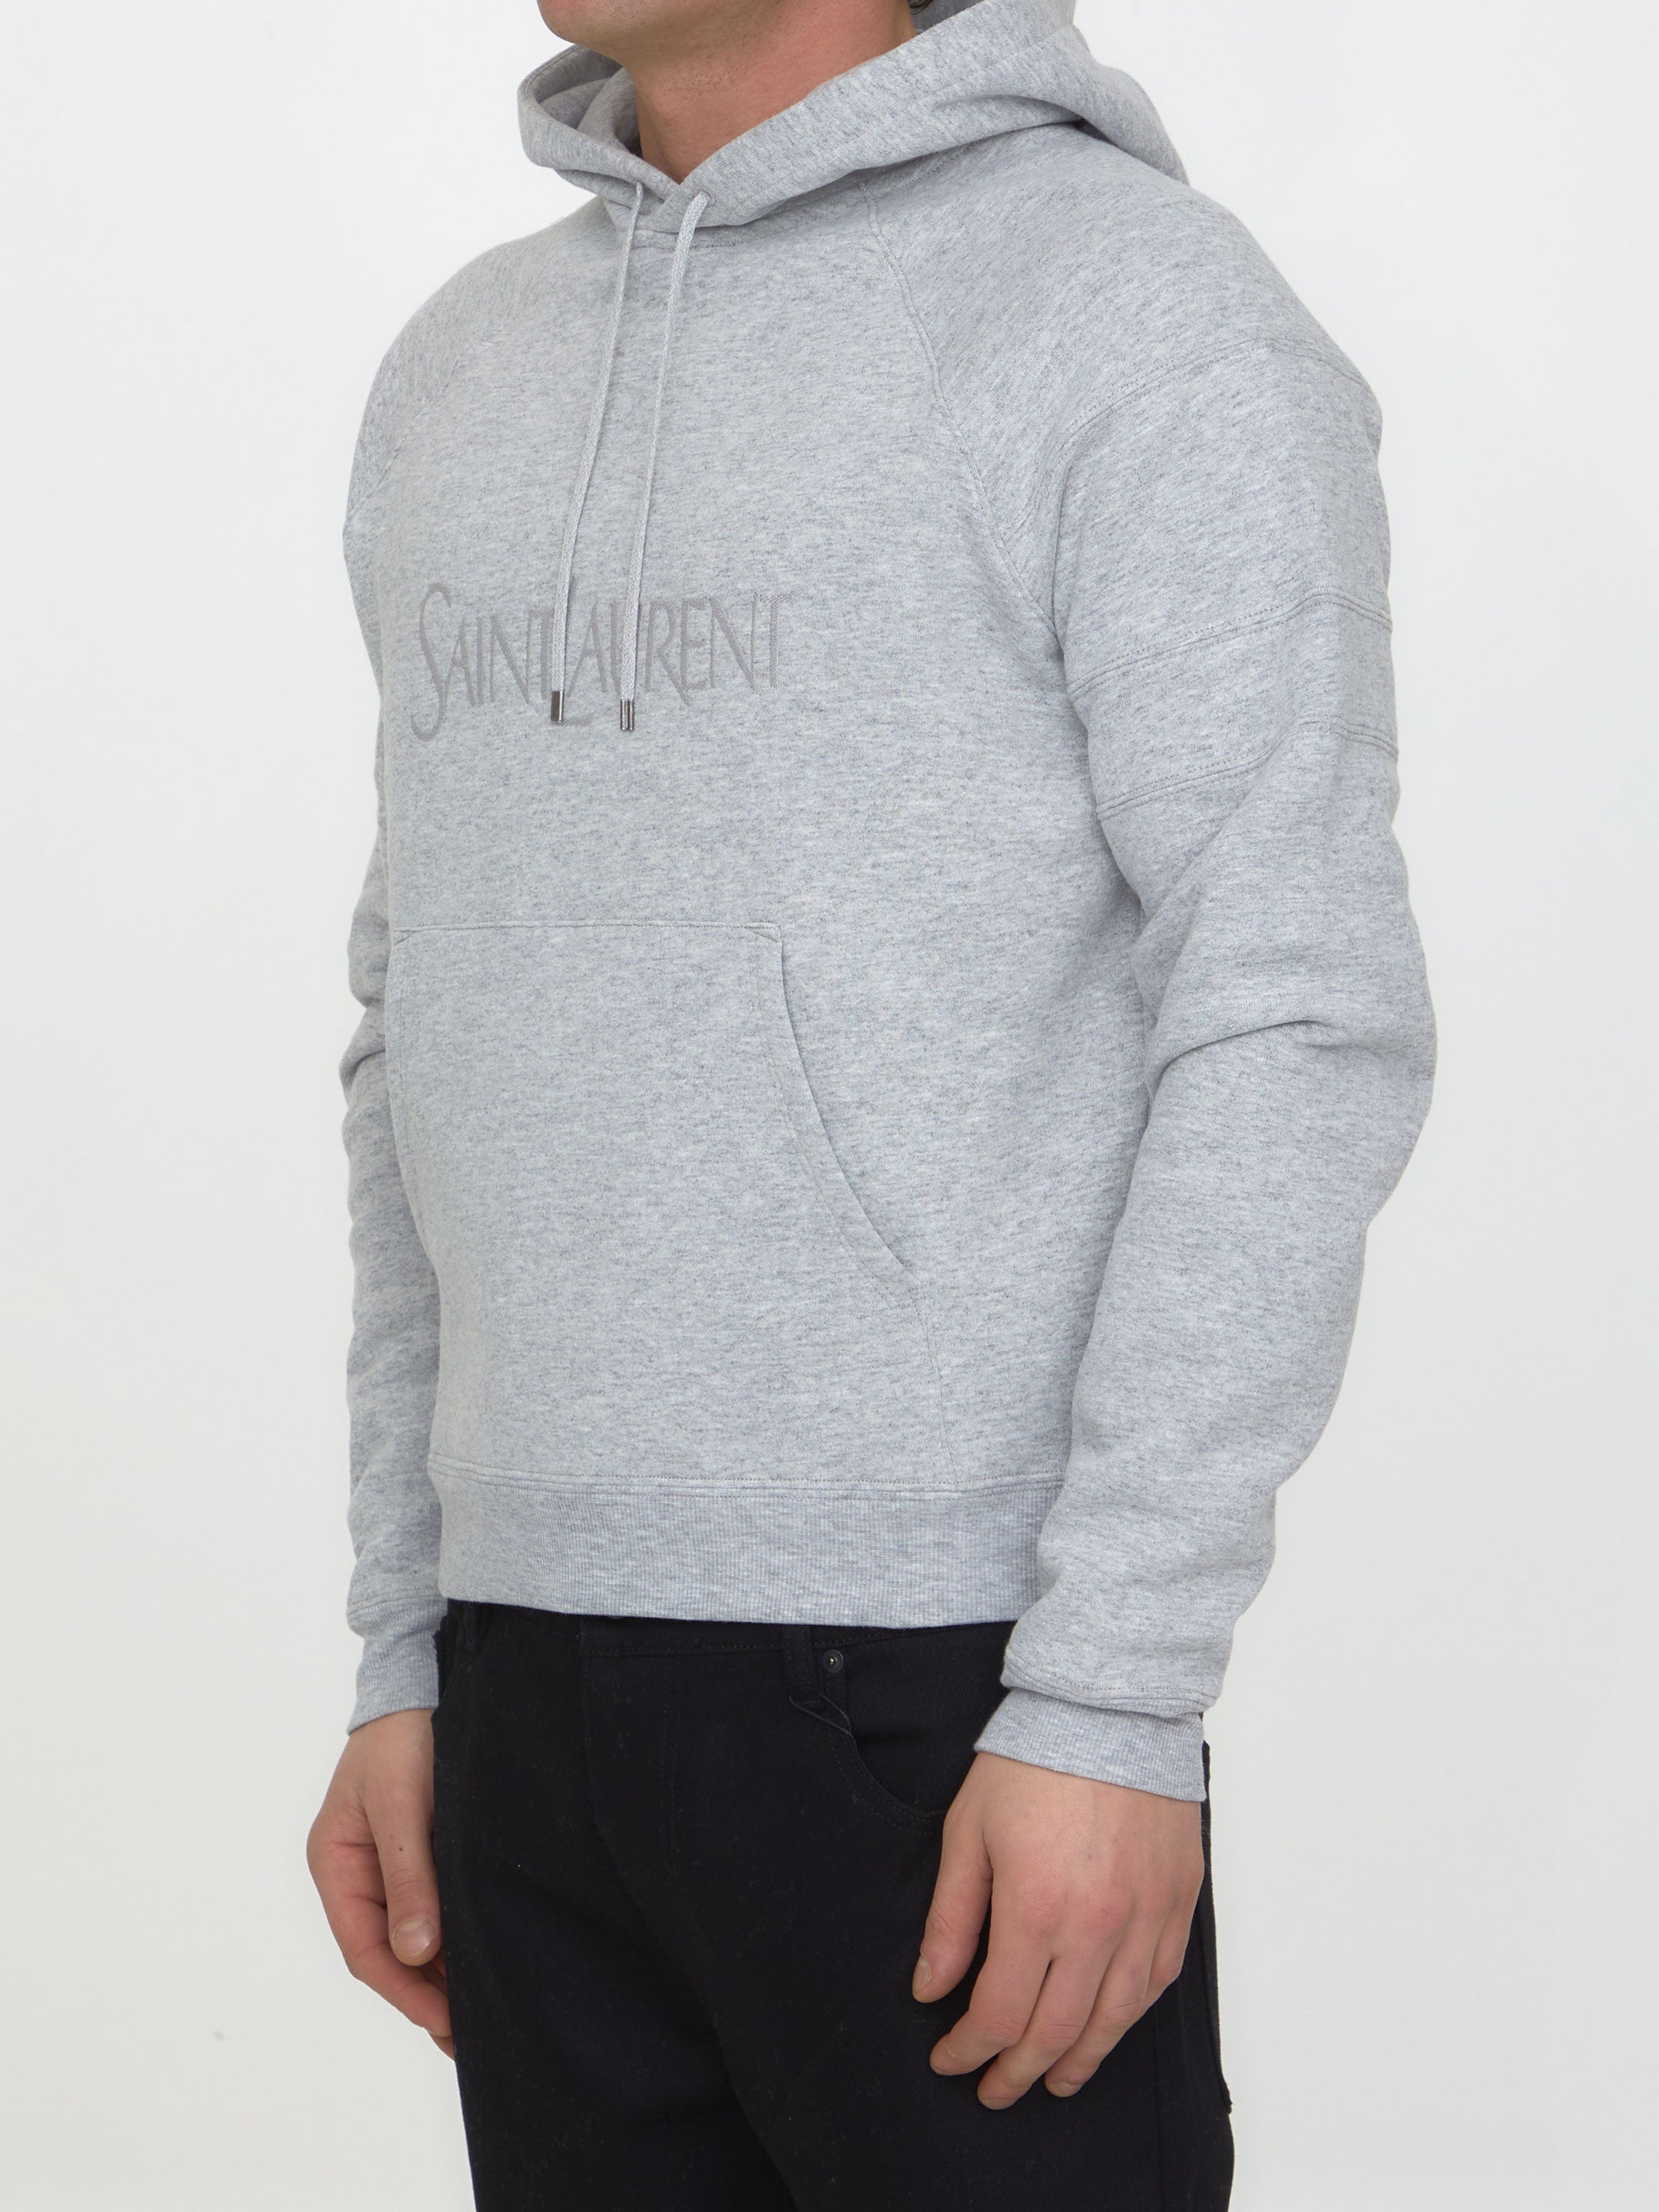 SAINT-LAURENT-OUTLET-SALE-Cotton-hoodie-with-logo-Strick-M-GREY-ARCHIVE-COLLECTION-2.jpg